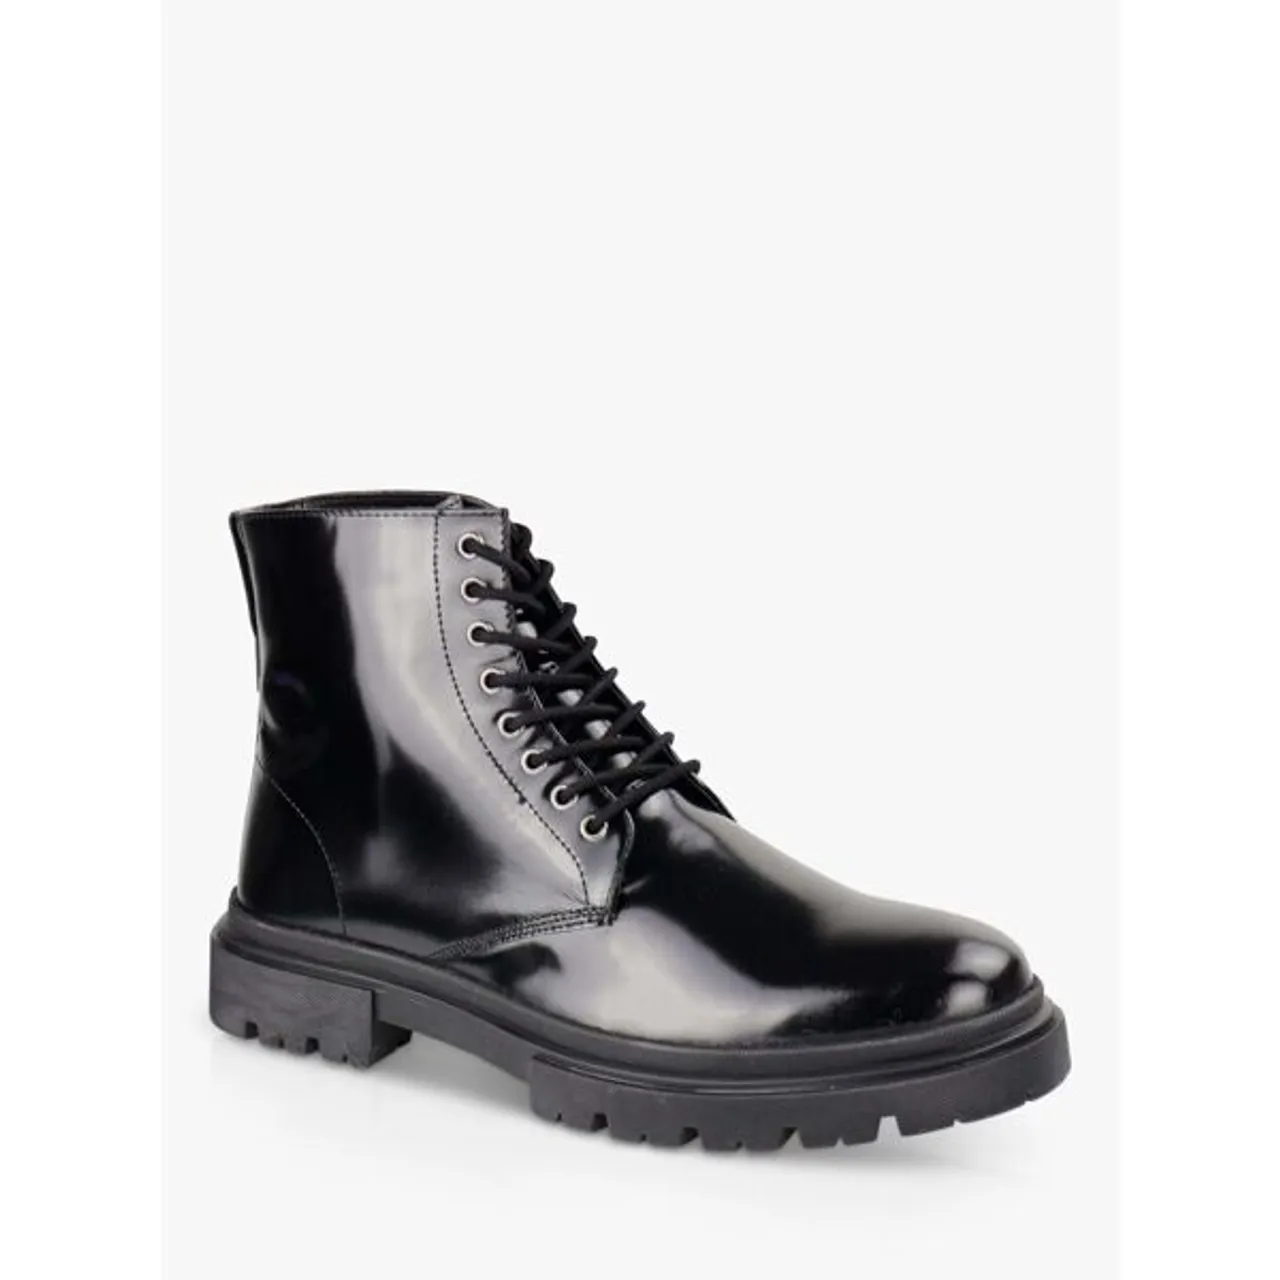 Silver Street London Greenwich Patent Leather Lace Up Ankle Boots, Black - Black - Male